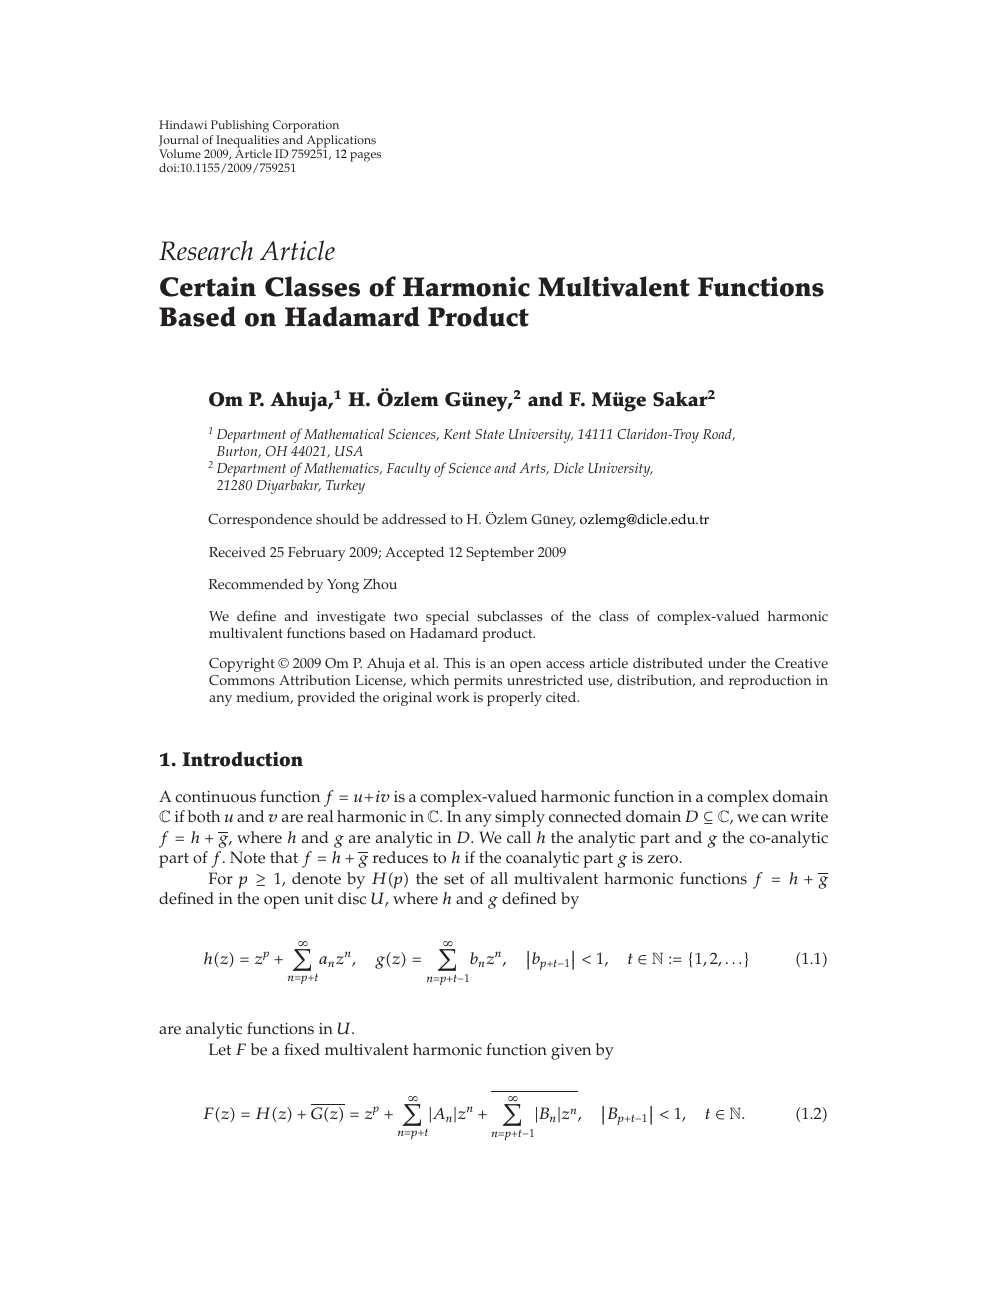 Certain Classes Of Harmonic Multivalent Functions Based On Hadamard Product Topic Of Research Paper In Mathematics Download Scholarly Article Pdf And Read For Free On Cyberleninka Open Science Hub